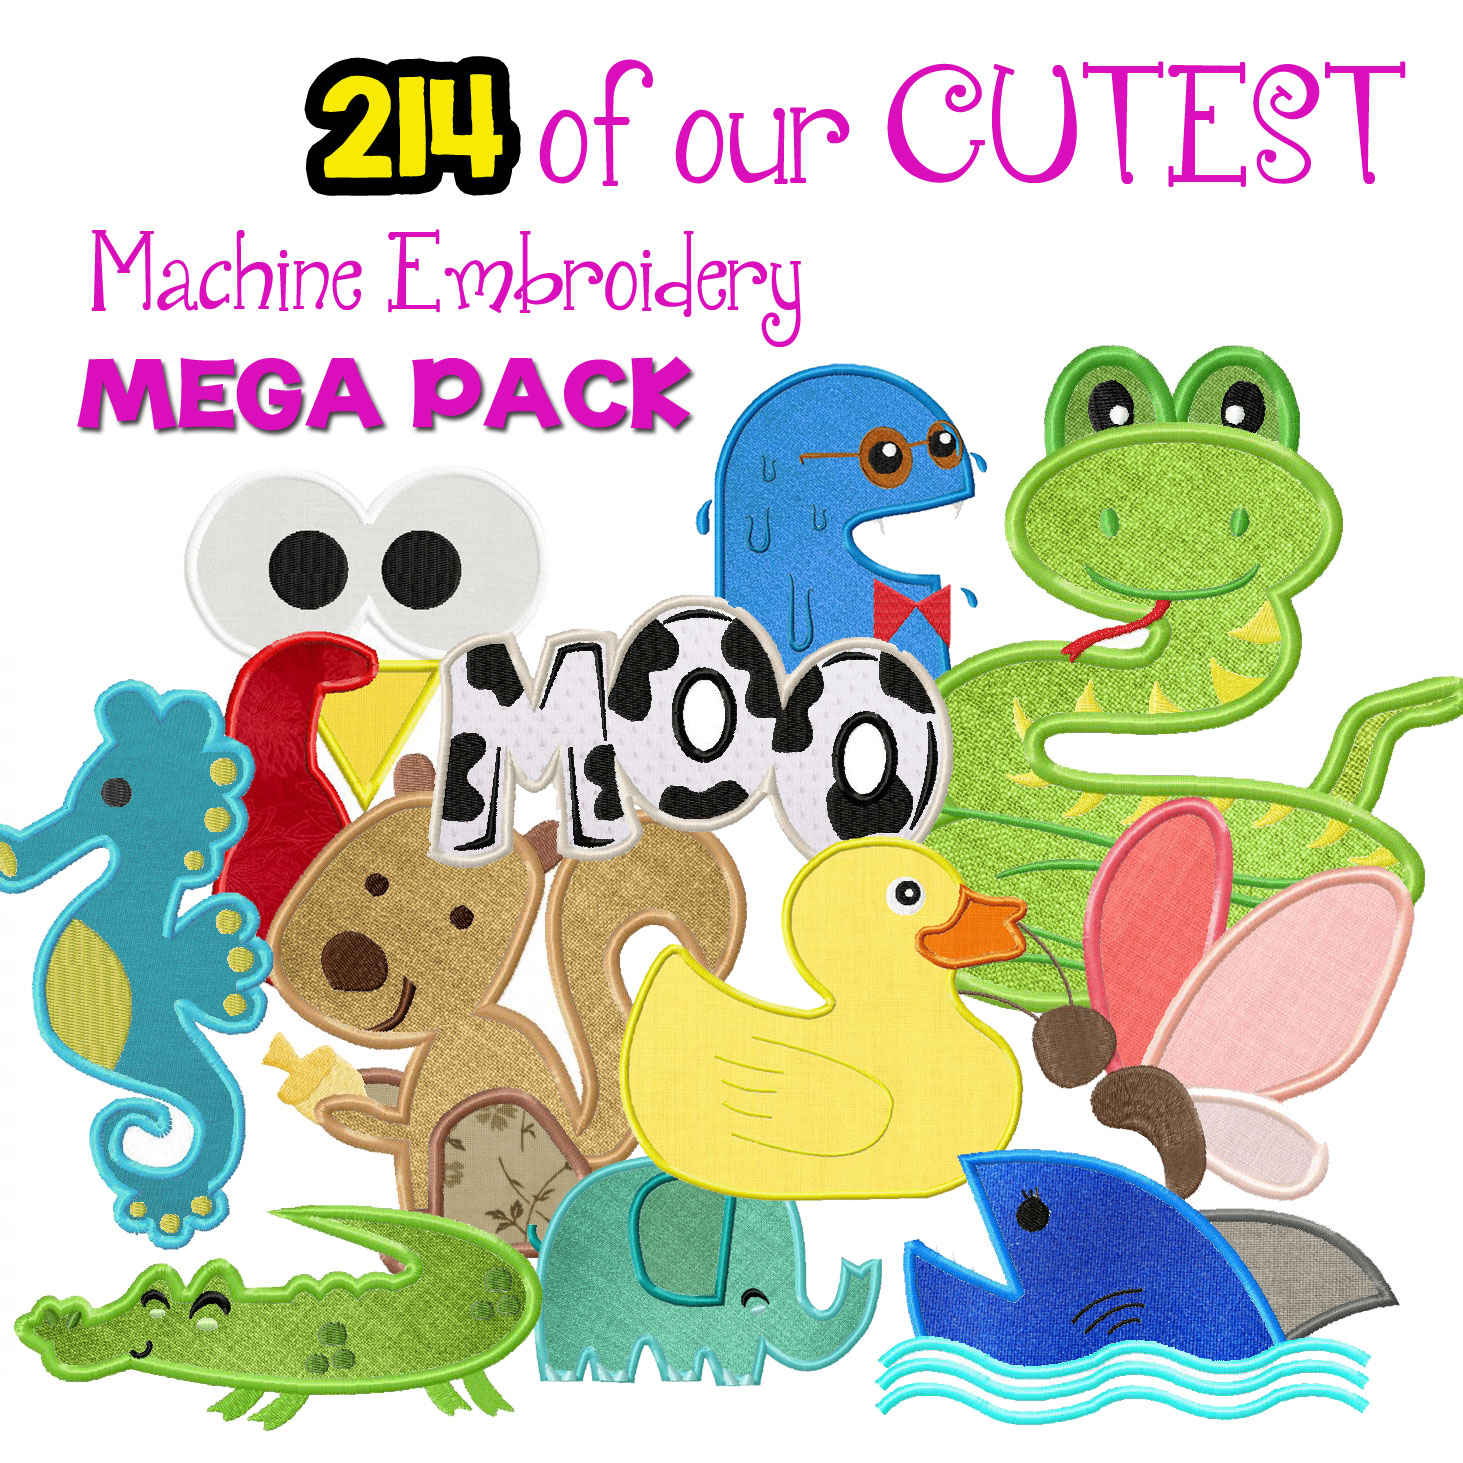 Fish Embroidery Patterns 214 Of Our Cutest Machine Embroidery Designs Only 999 Super